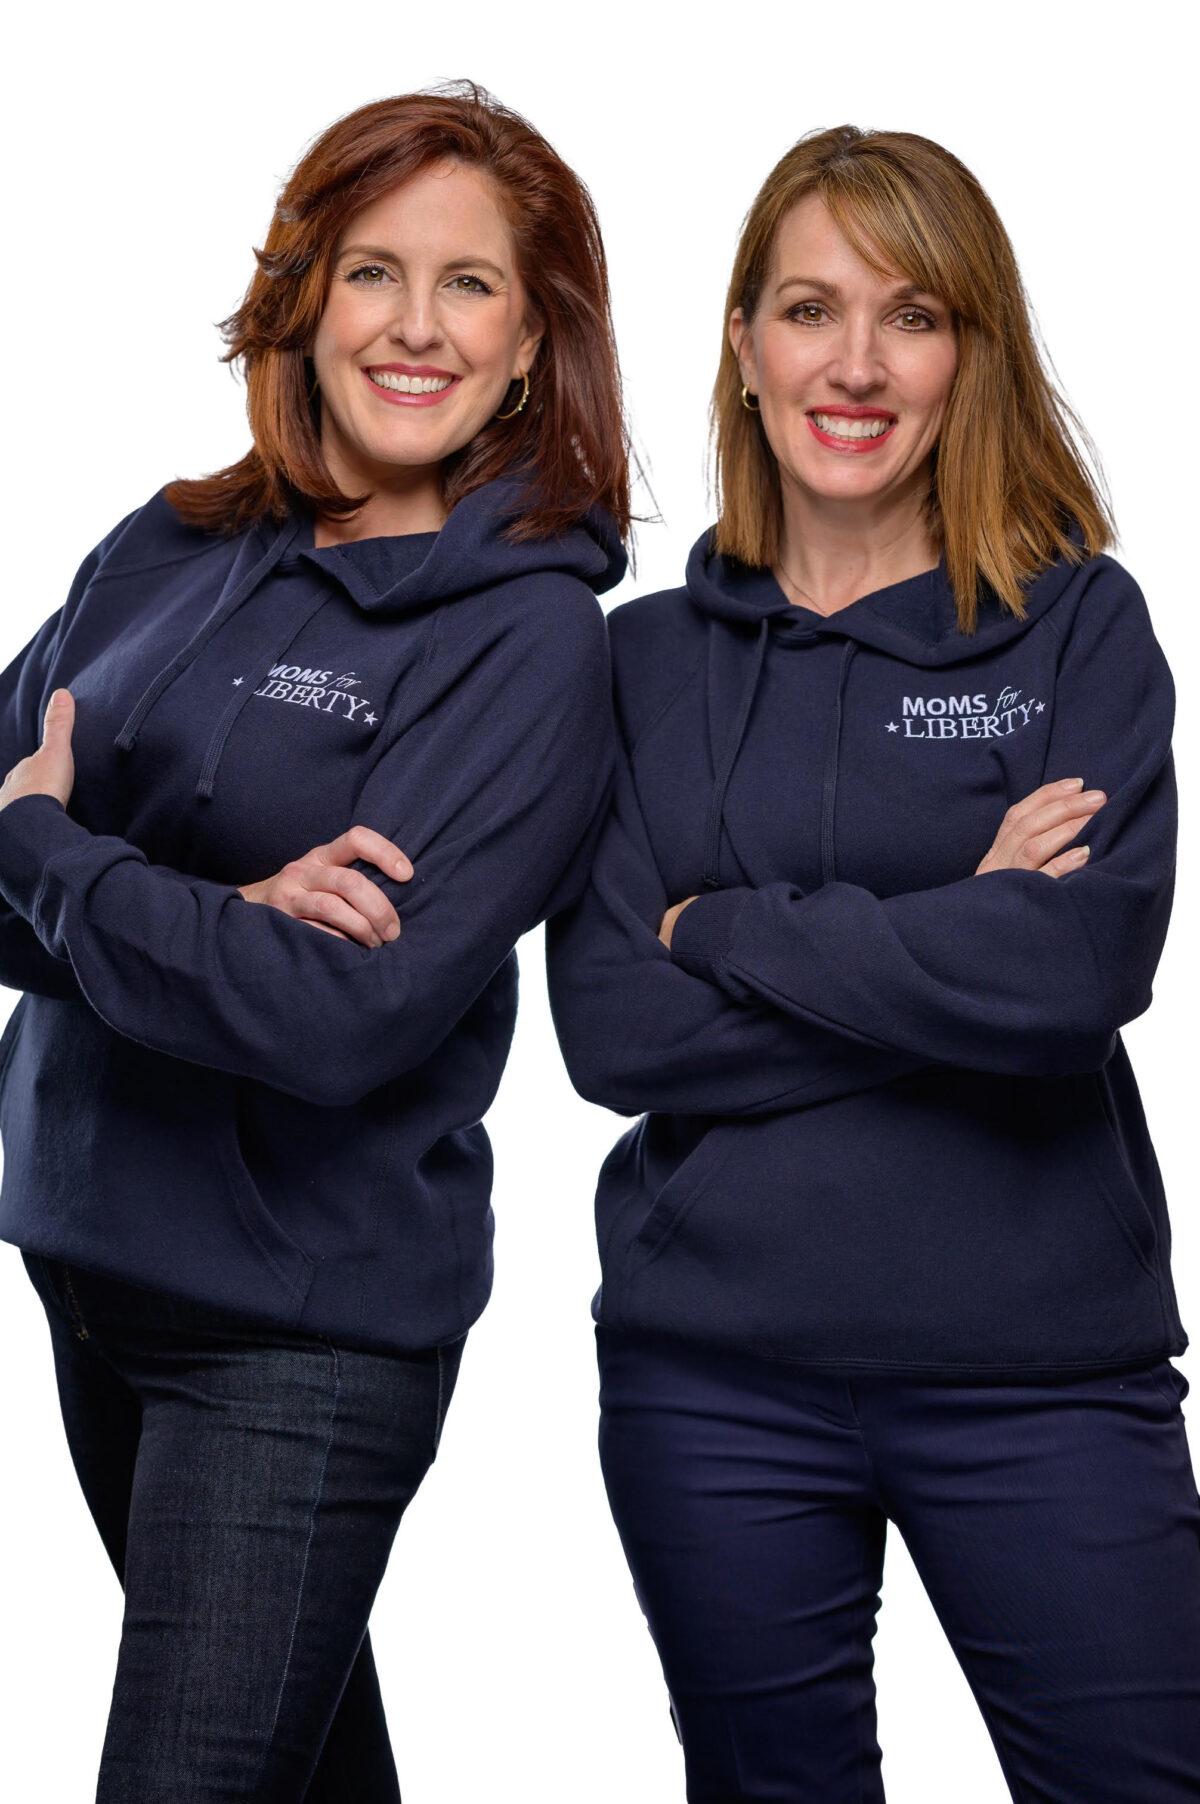 Tiffany Justice (L) and Tina Descovich, co-founders of Moms for Liberty. (Courtesy of Tiffany Justice)